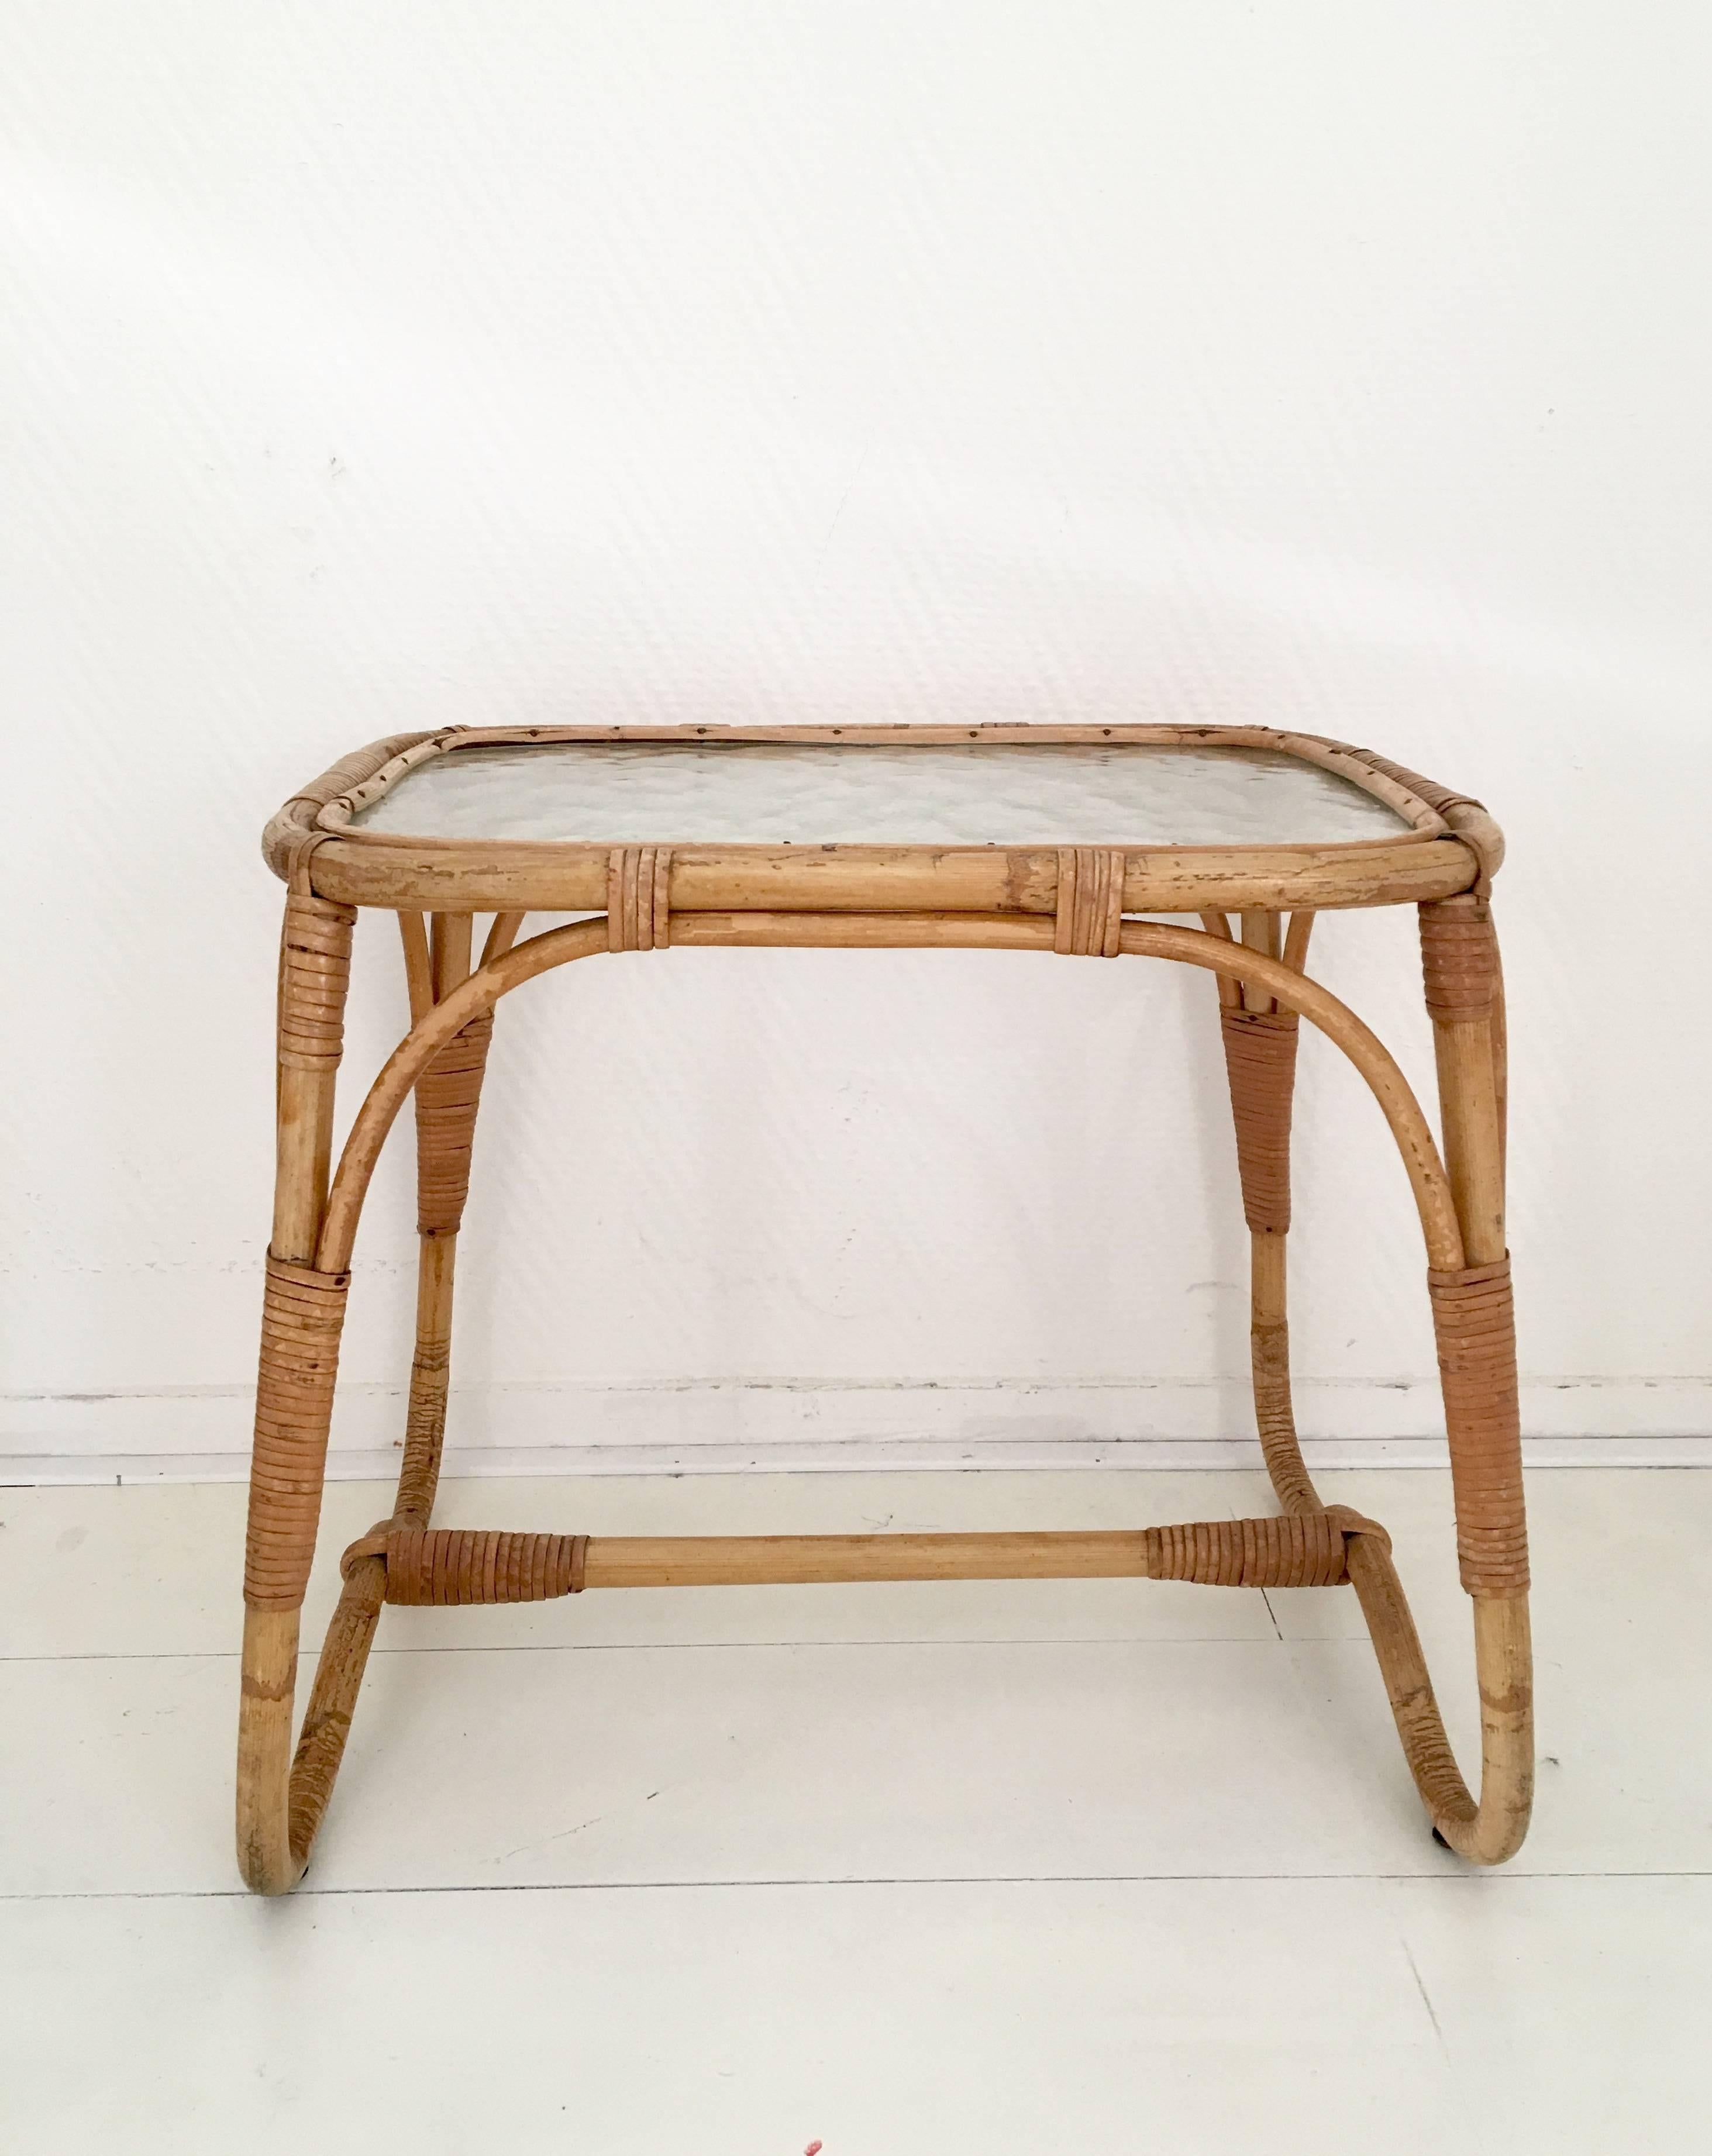 This small coffee or side table was designed and manufactured in the Netherlands, circa 1960s. It features a rattan/bamboo base with a glass top. The table is in very good condition with only minimal signs of age and use.

 